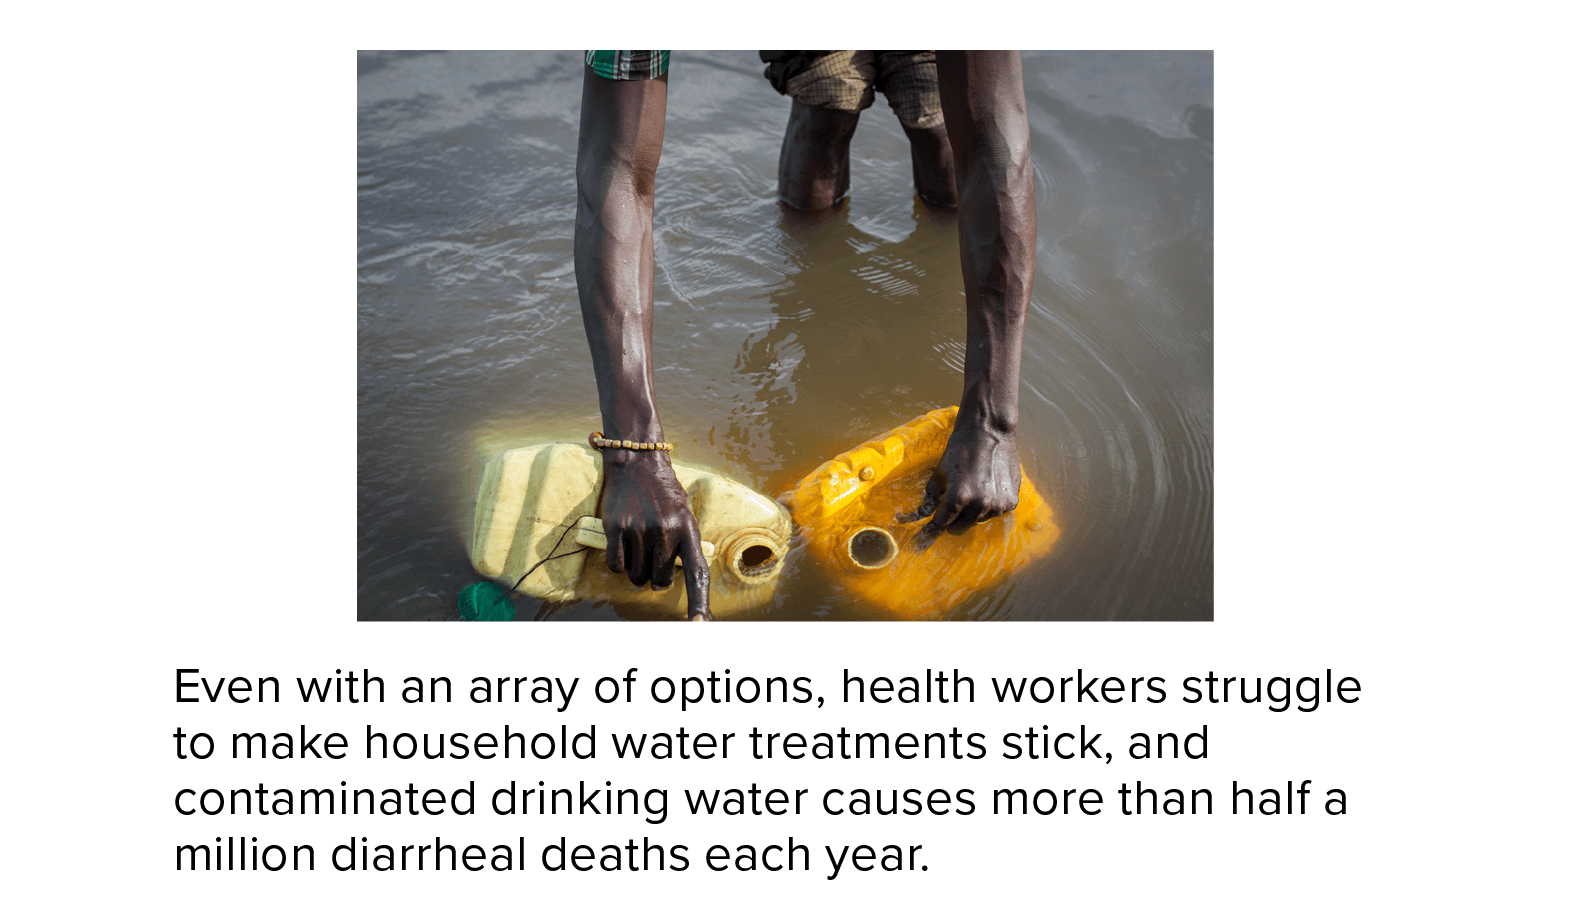 Photograph of a man in South Sudan filling plastic containers with dirty river water. Even with an array of options, health workers struggle to make household water treatments stick, and contaminated drinking water causes more than half a million diarrheal deaths each year.